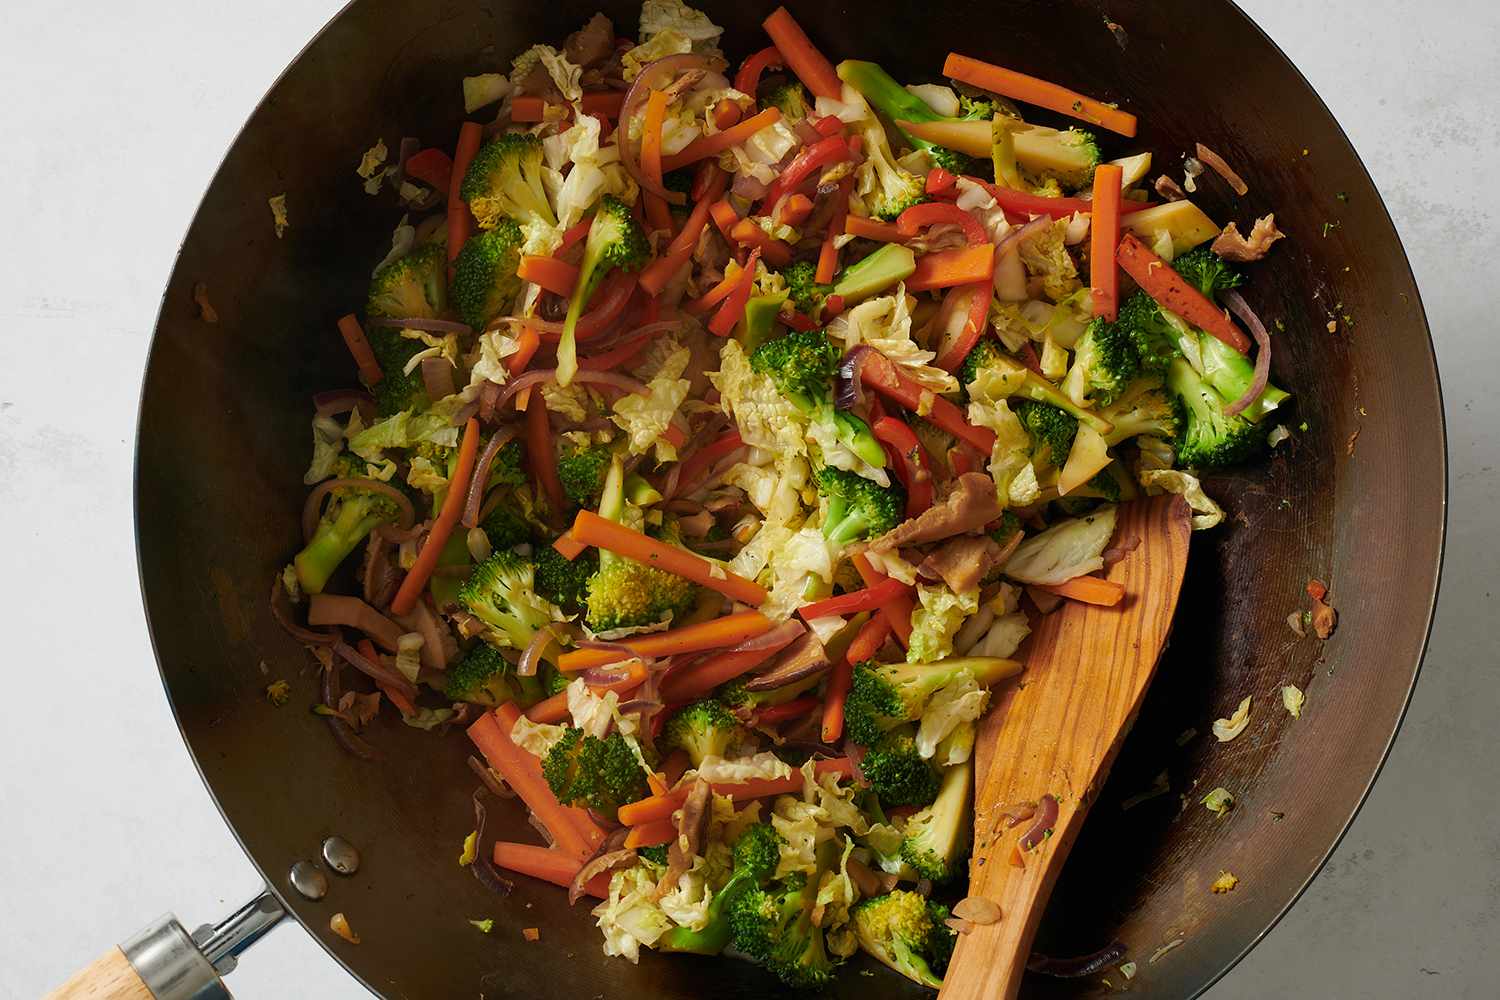 Mushrooms and cabbage added to the wok